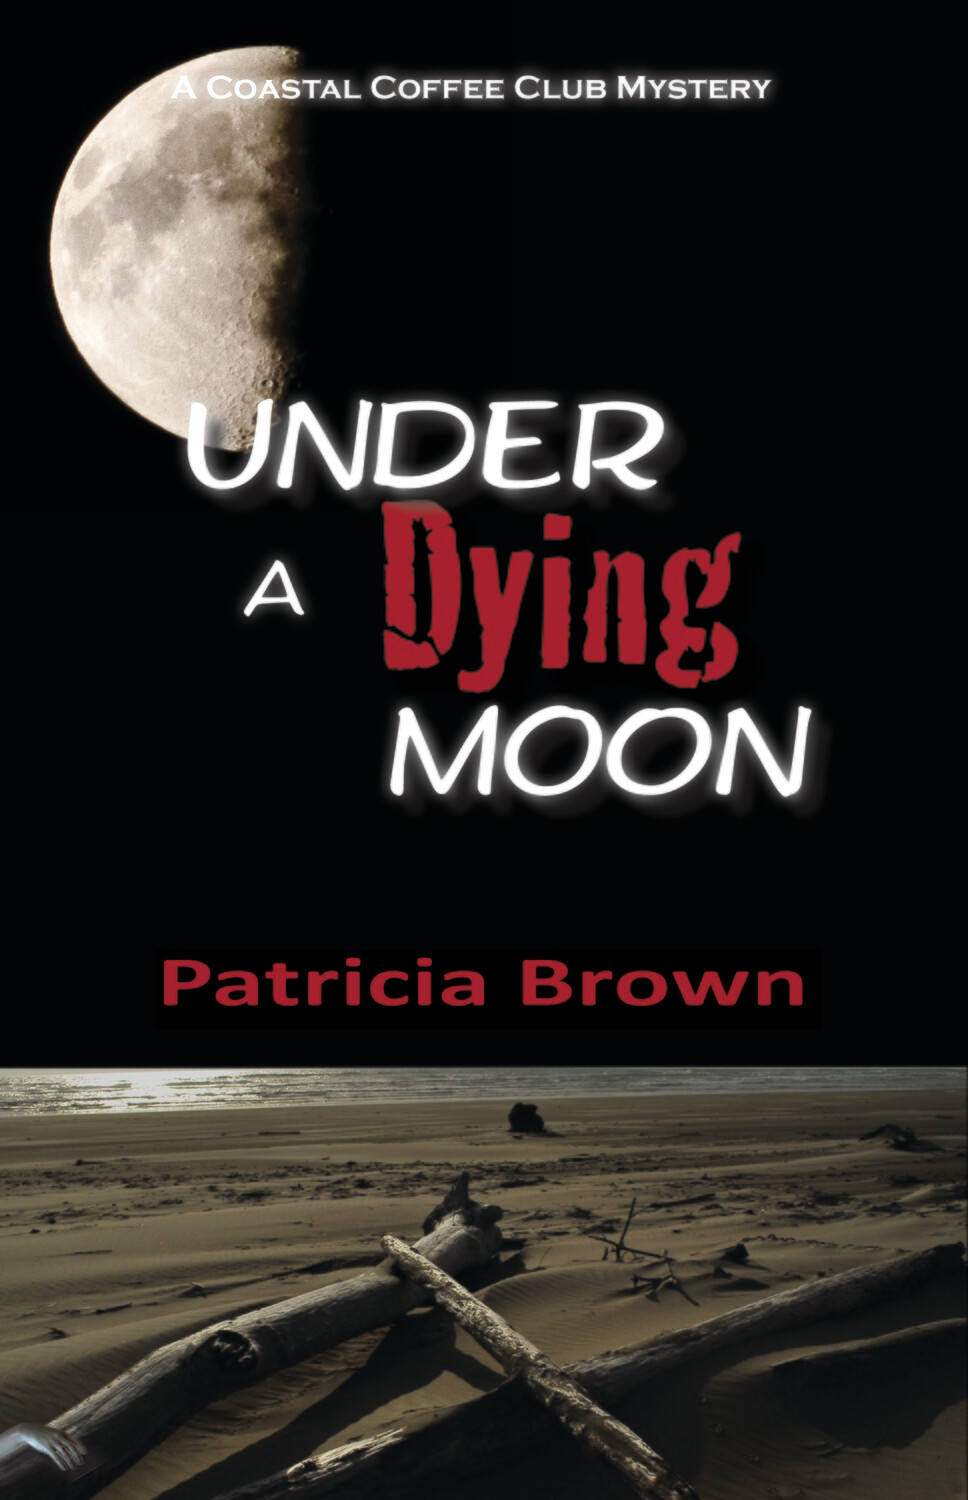 Under A Dying Moon - Author signed copy